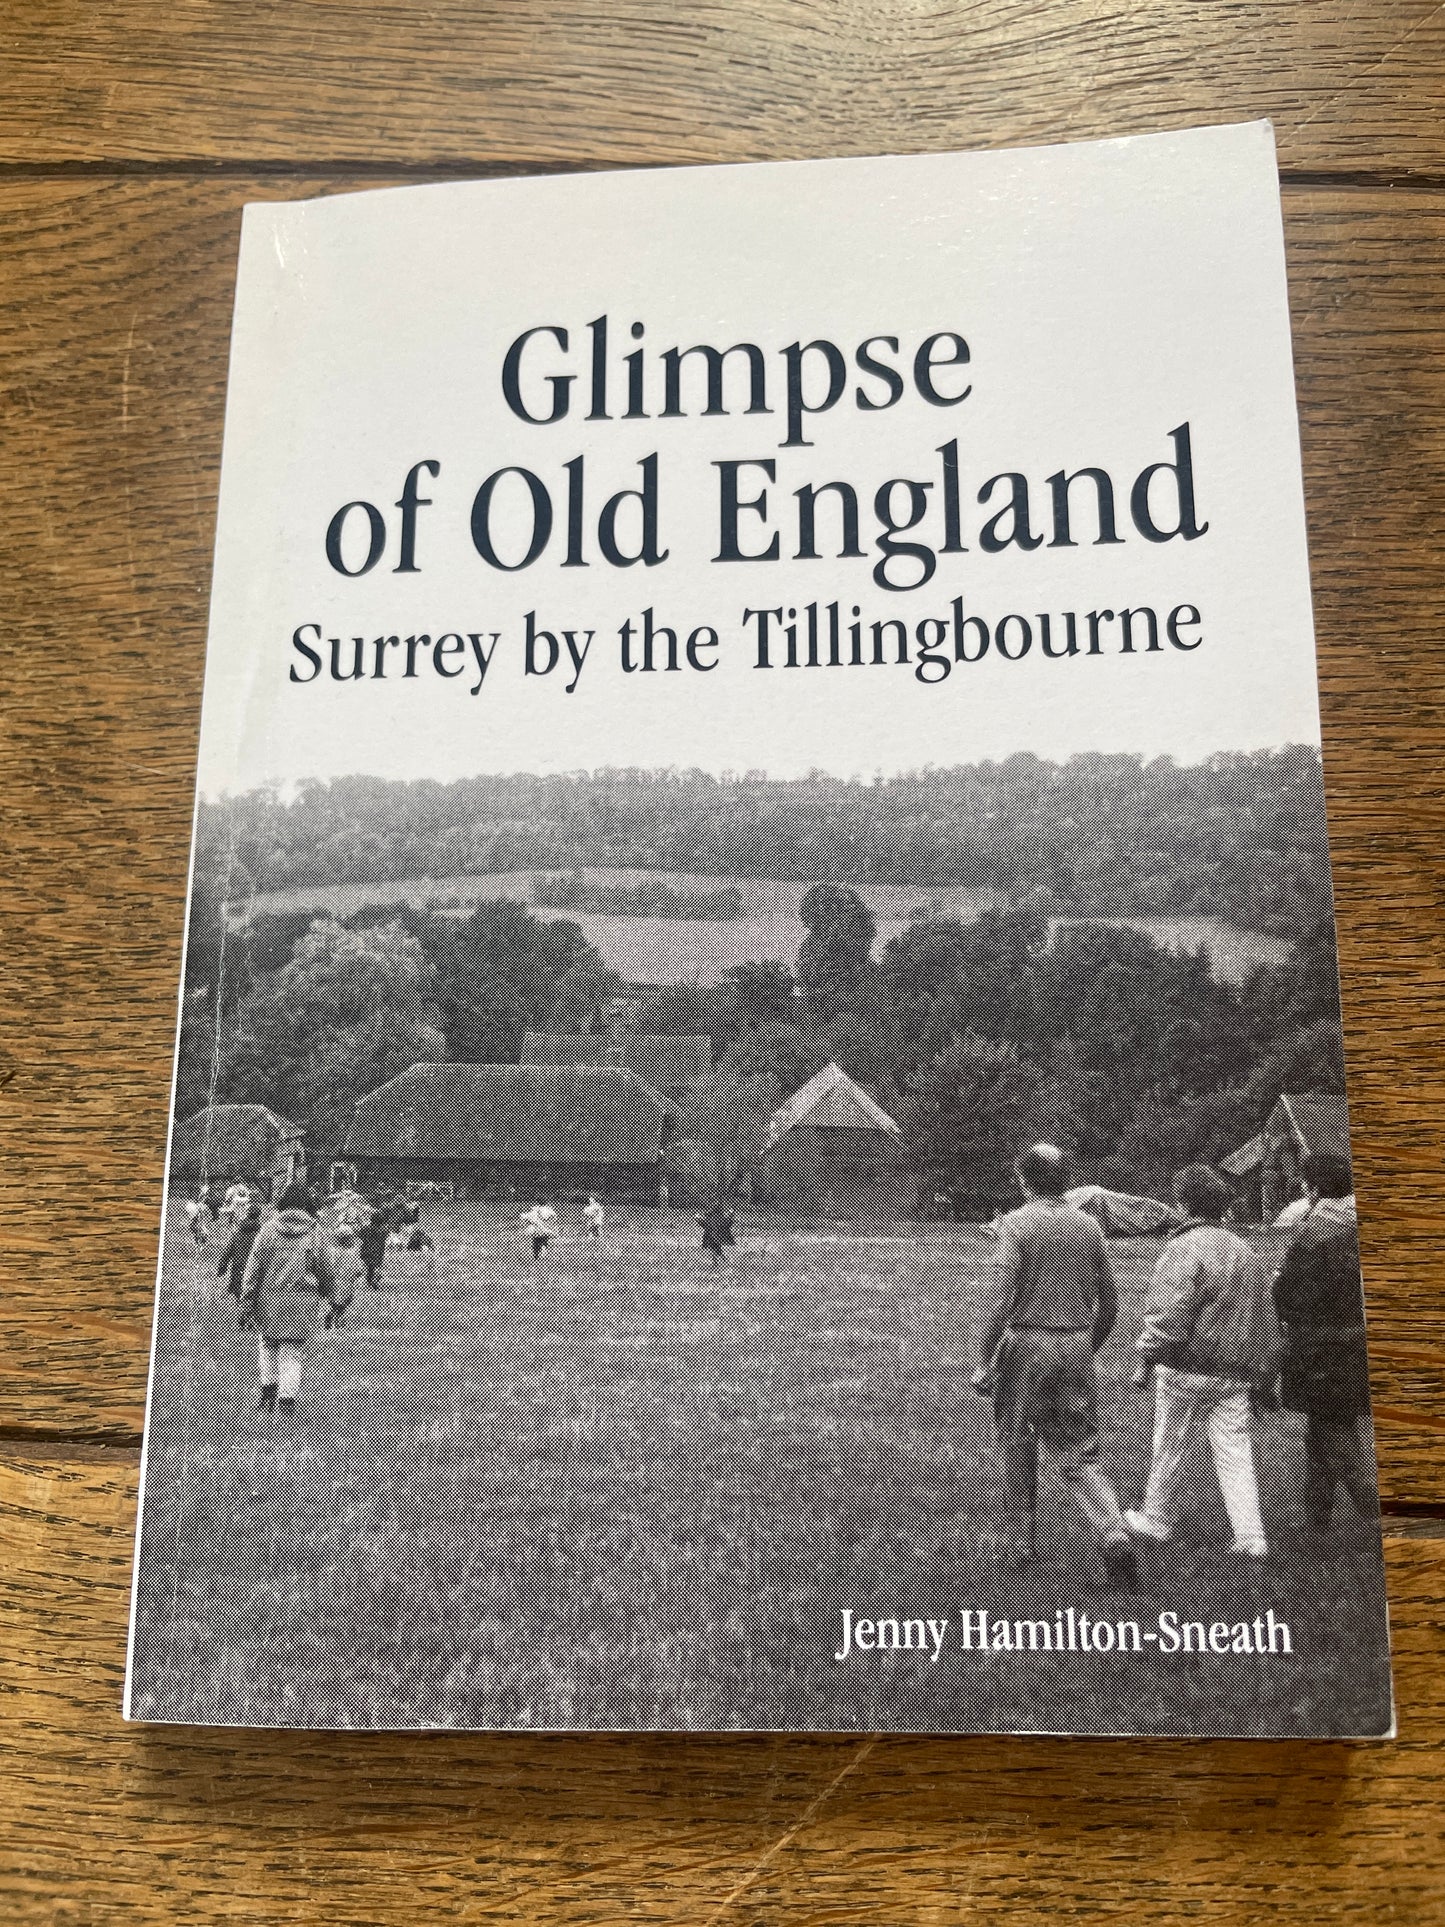 Glimpse of Old England - Surrey by the Tillingbourne by Jenny Hamilton-Sneath